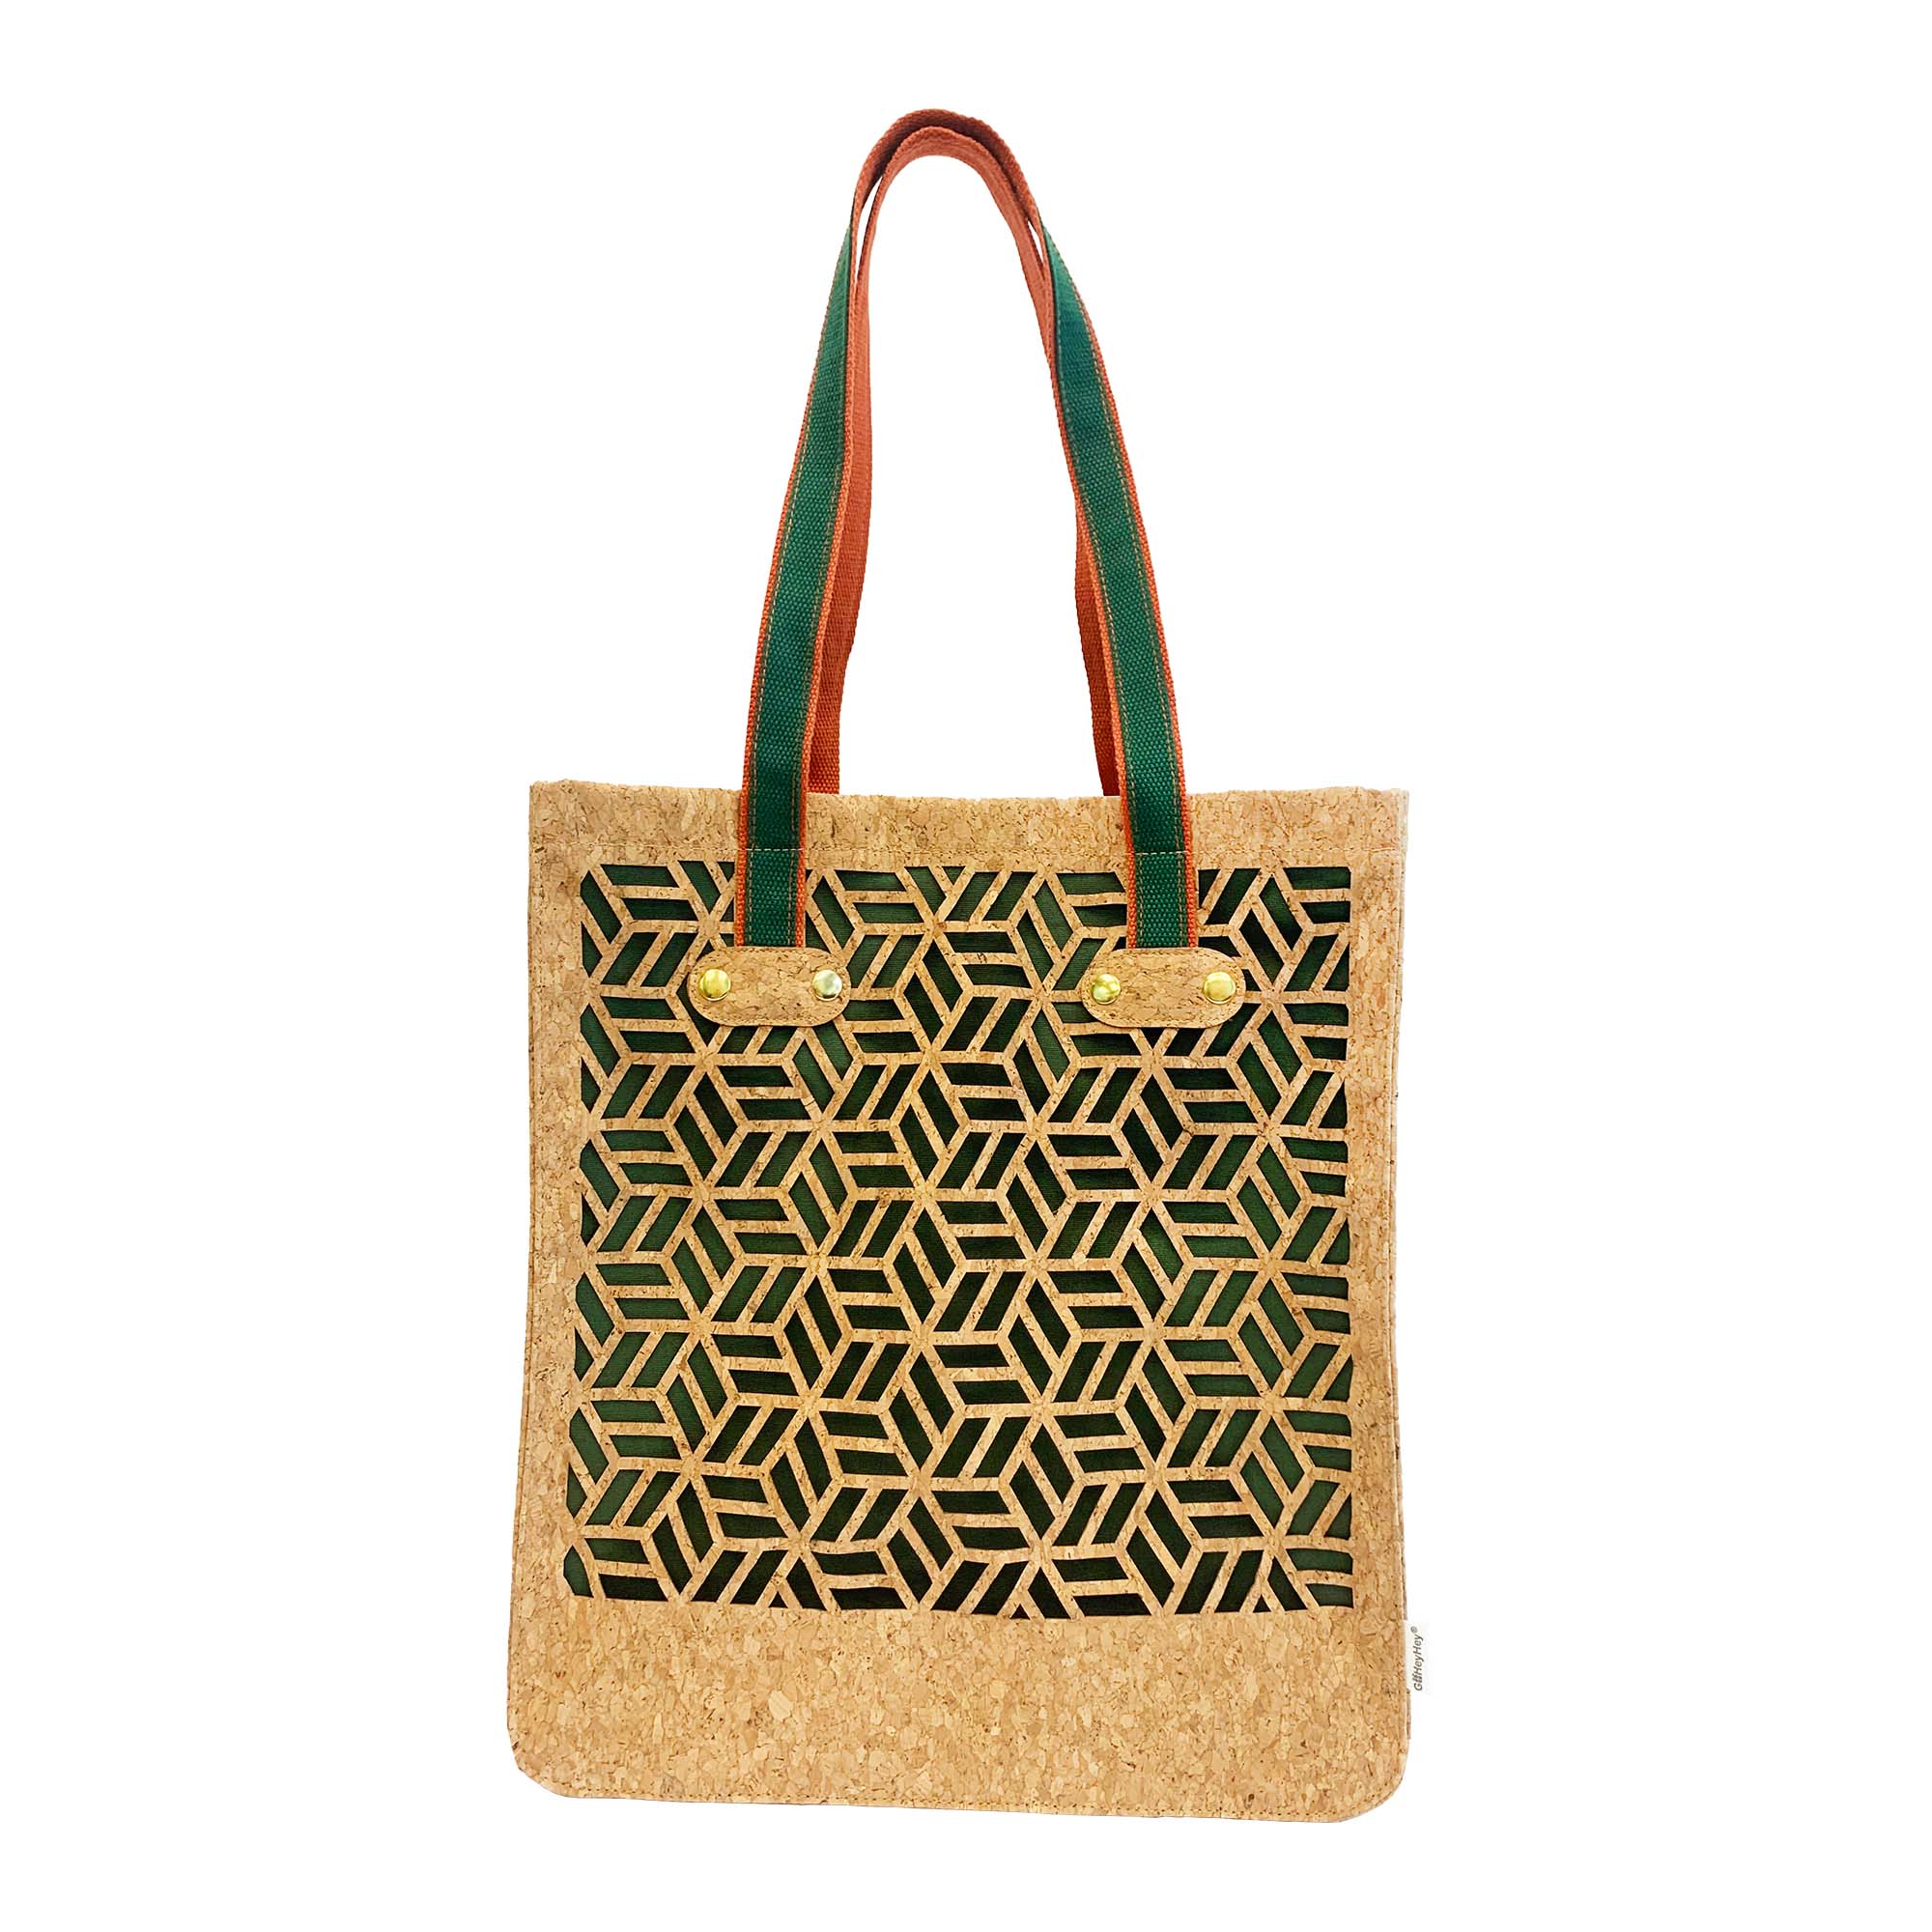 Polygonal Cork Fabric Tote Bag-sustainable tote bags-tote bag for women-leather tote bags for women